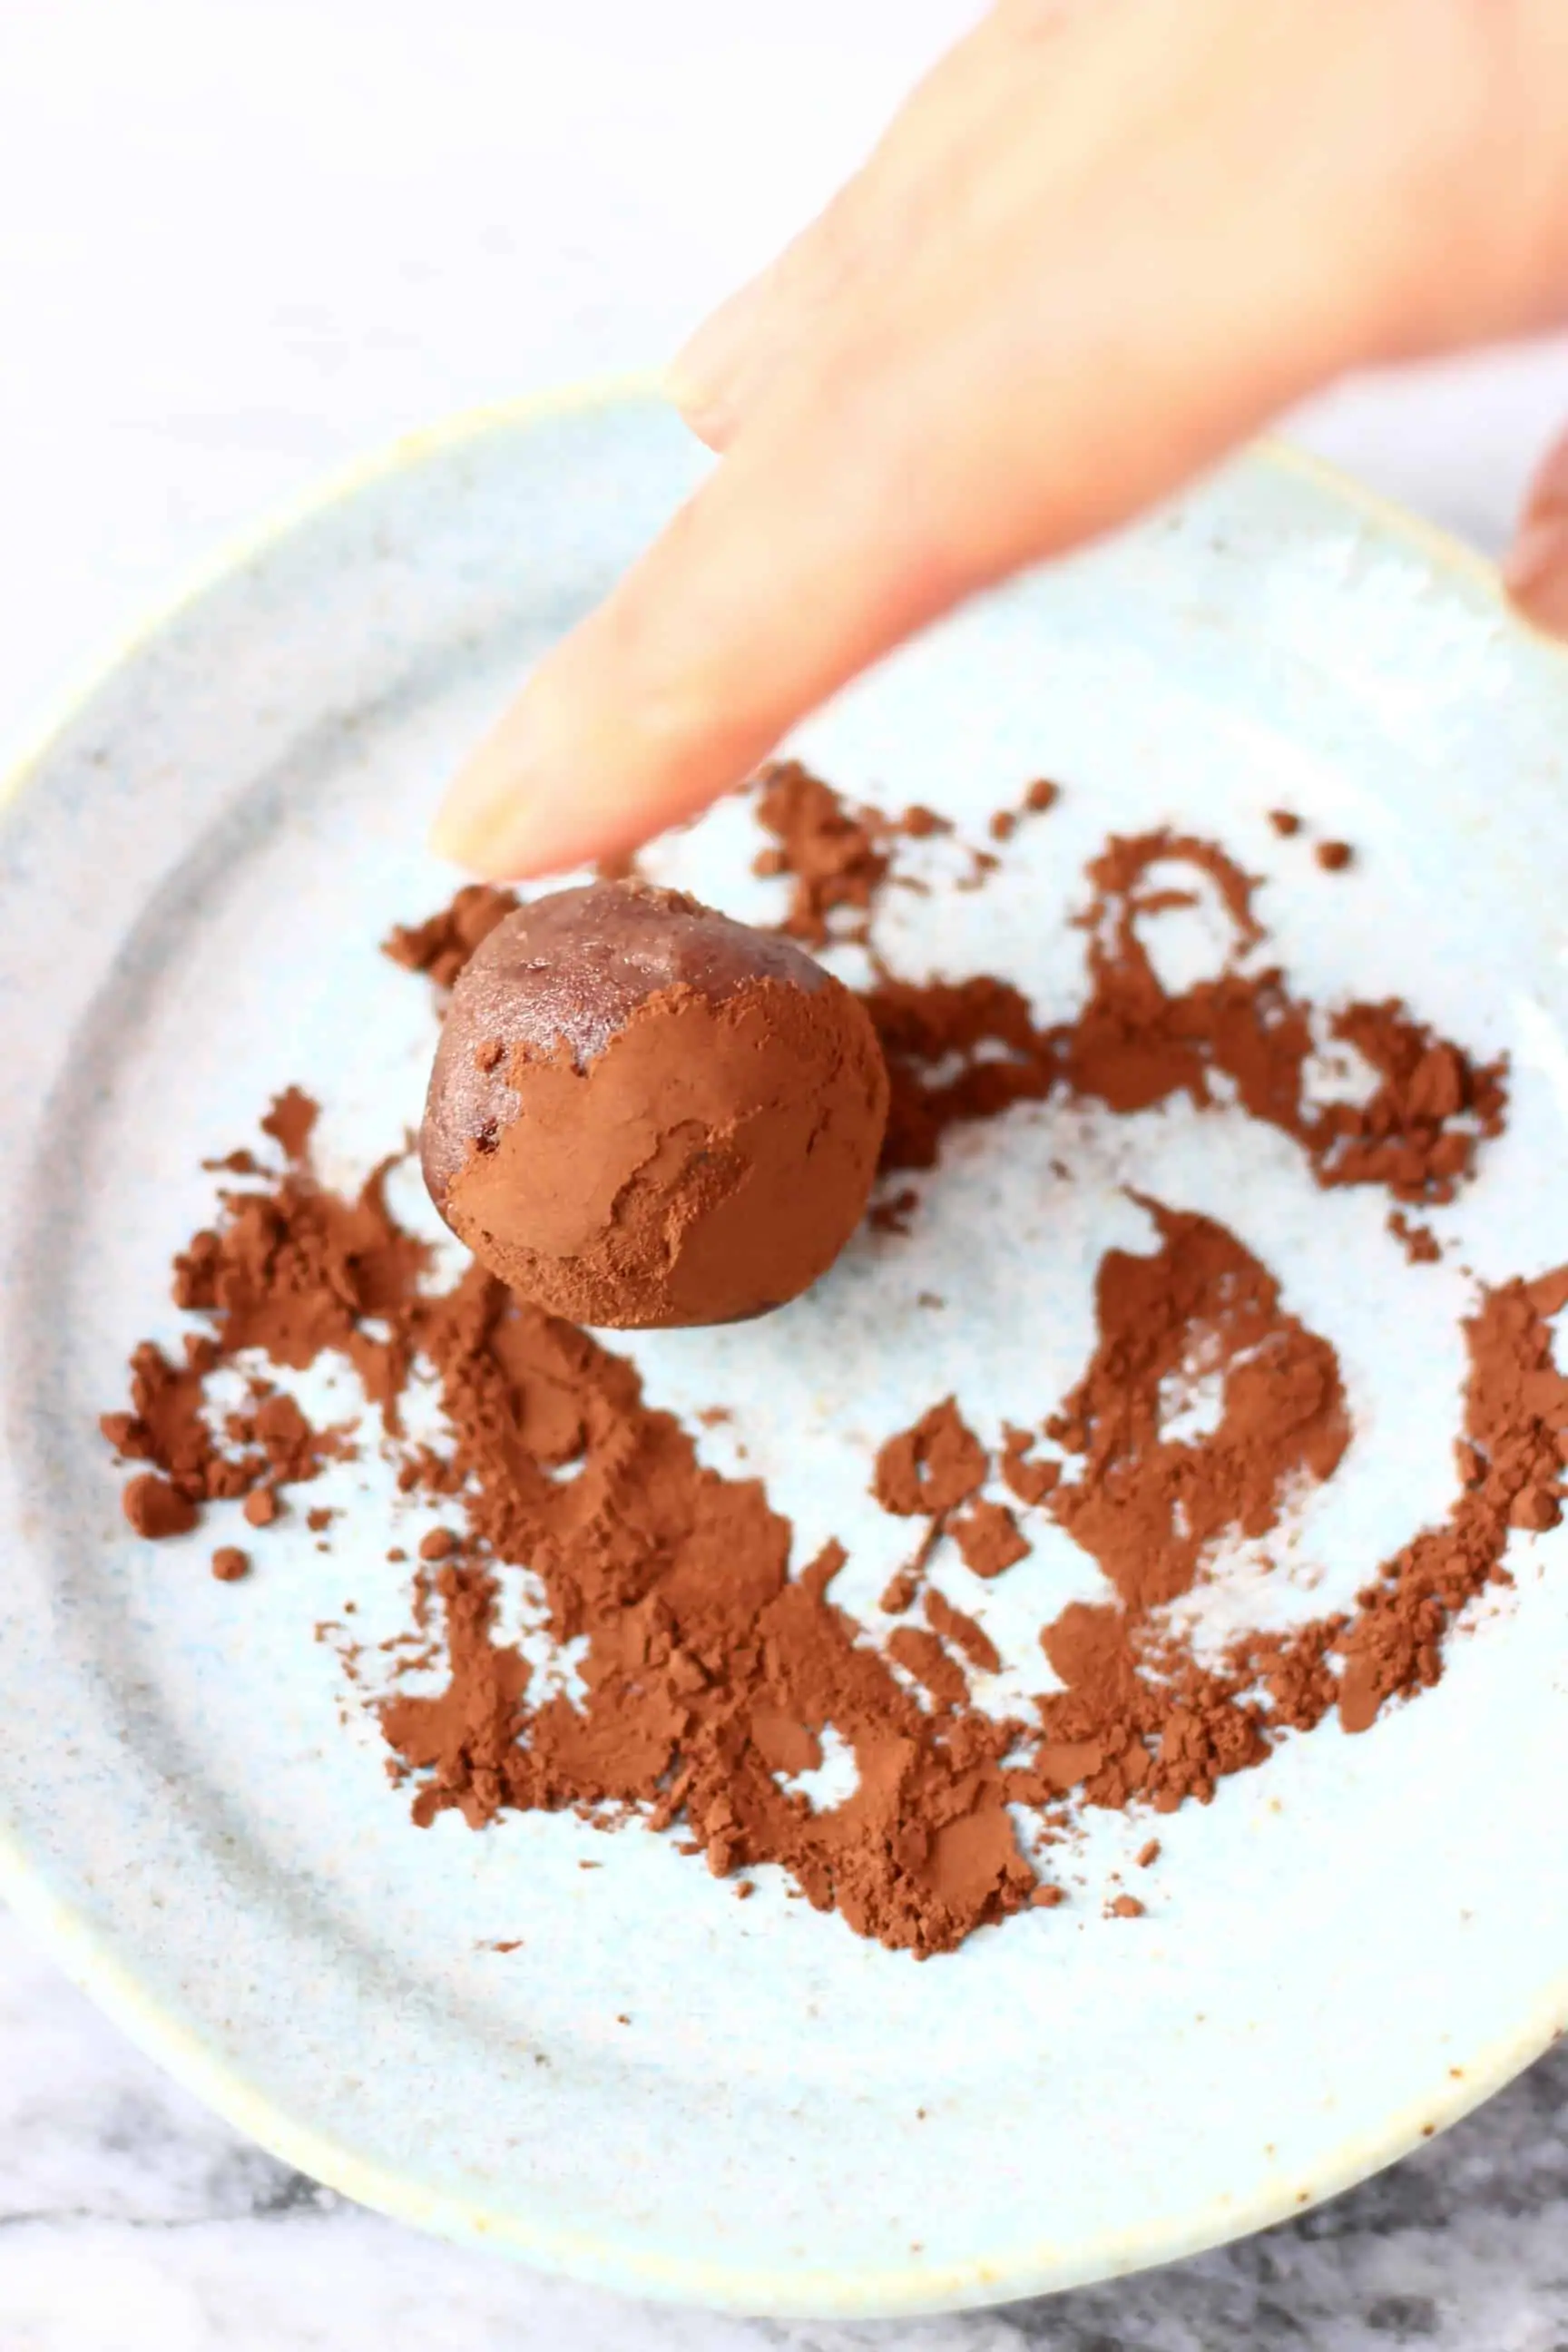 A vegan chocolate truffle being rolled in cocoa powder on a plate with fingers